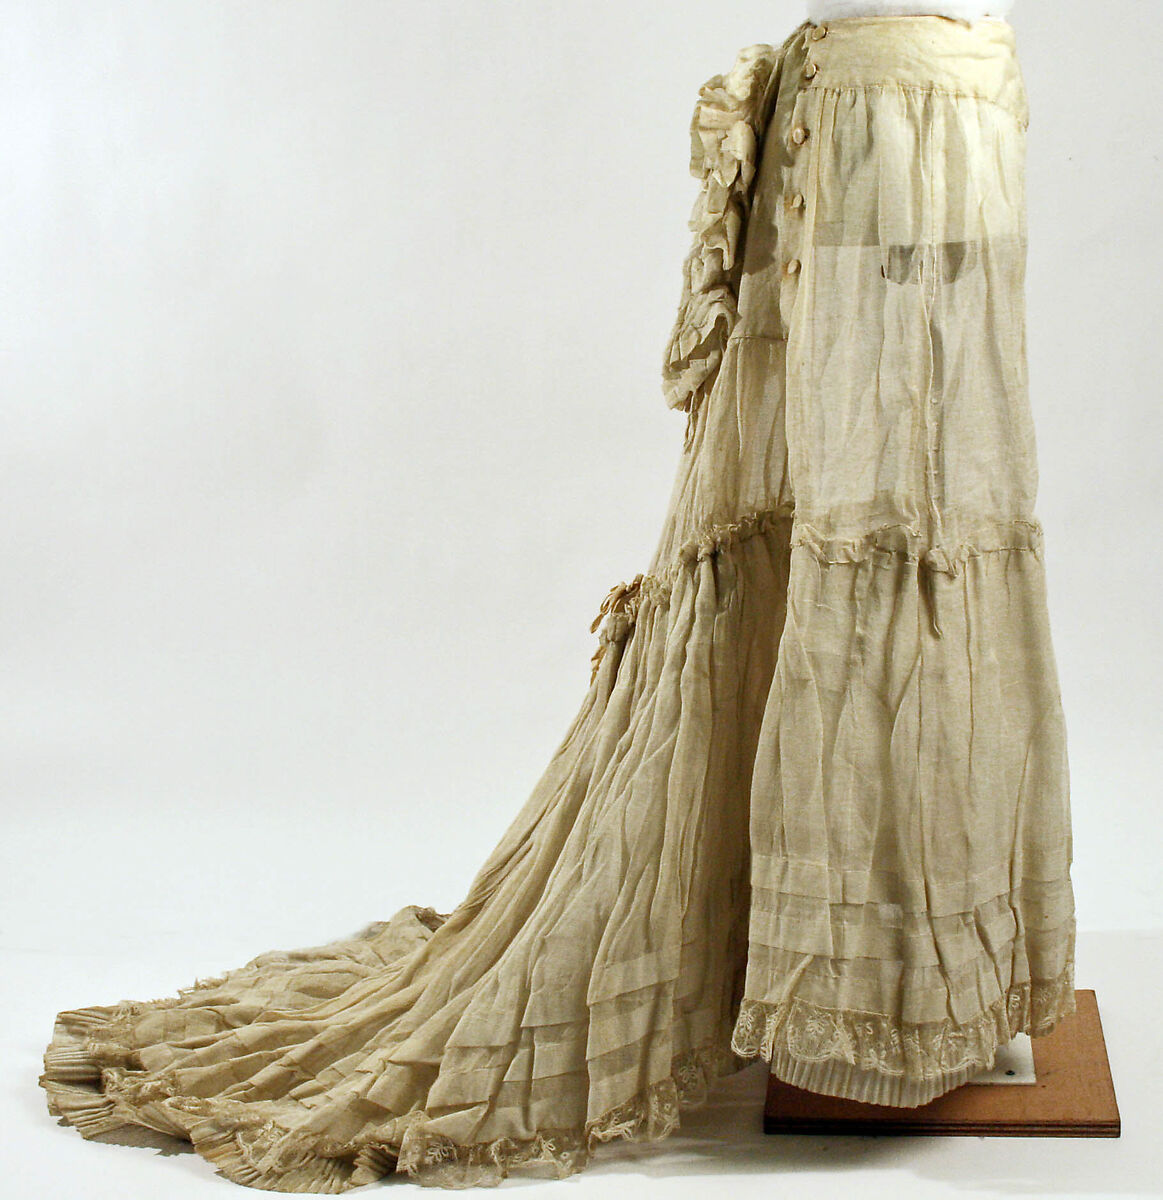 Petticoat, cotton, probably French 